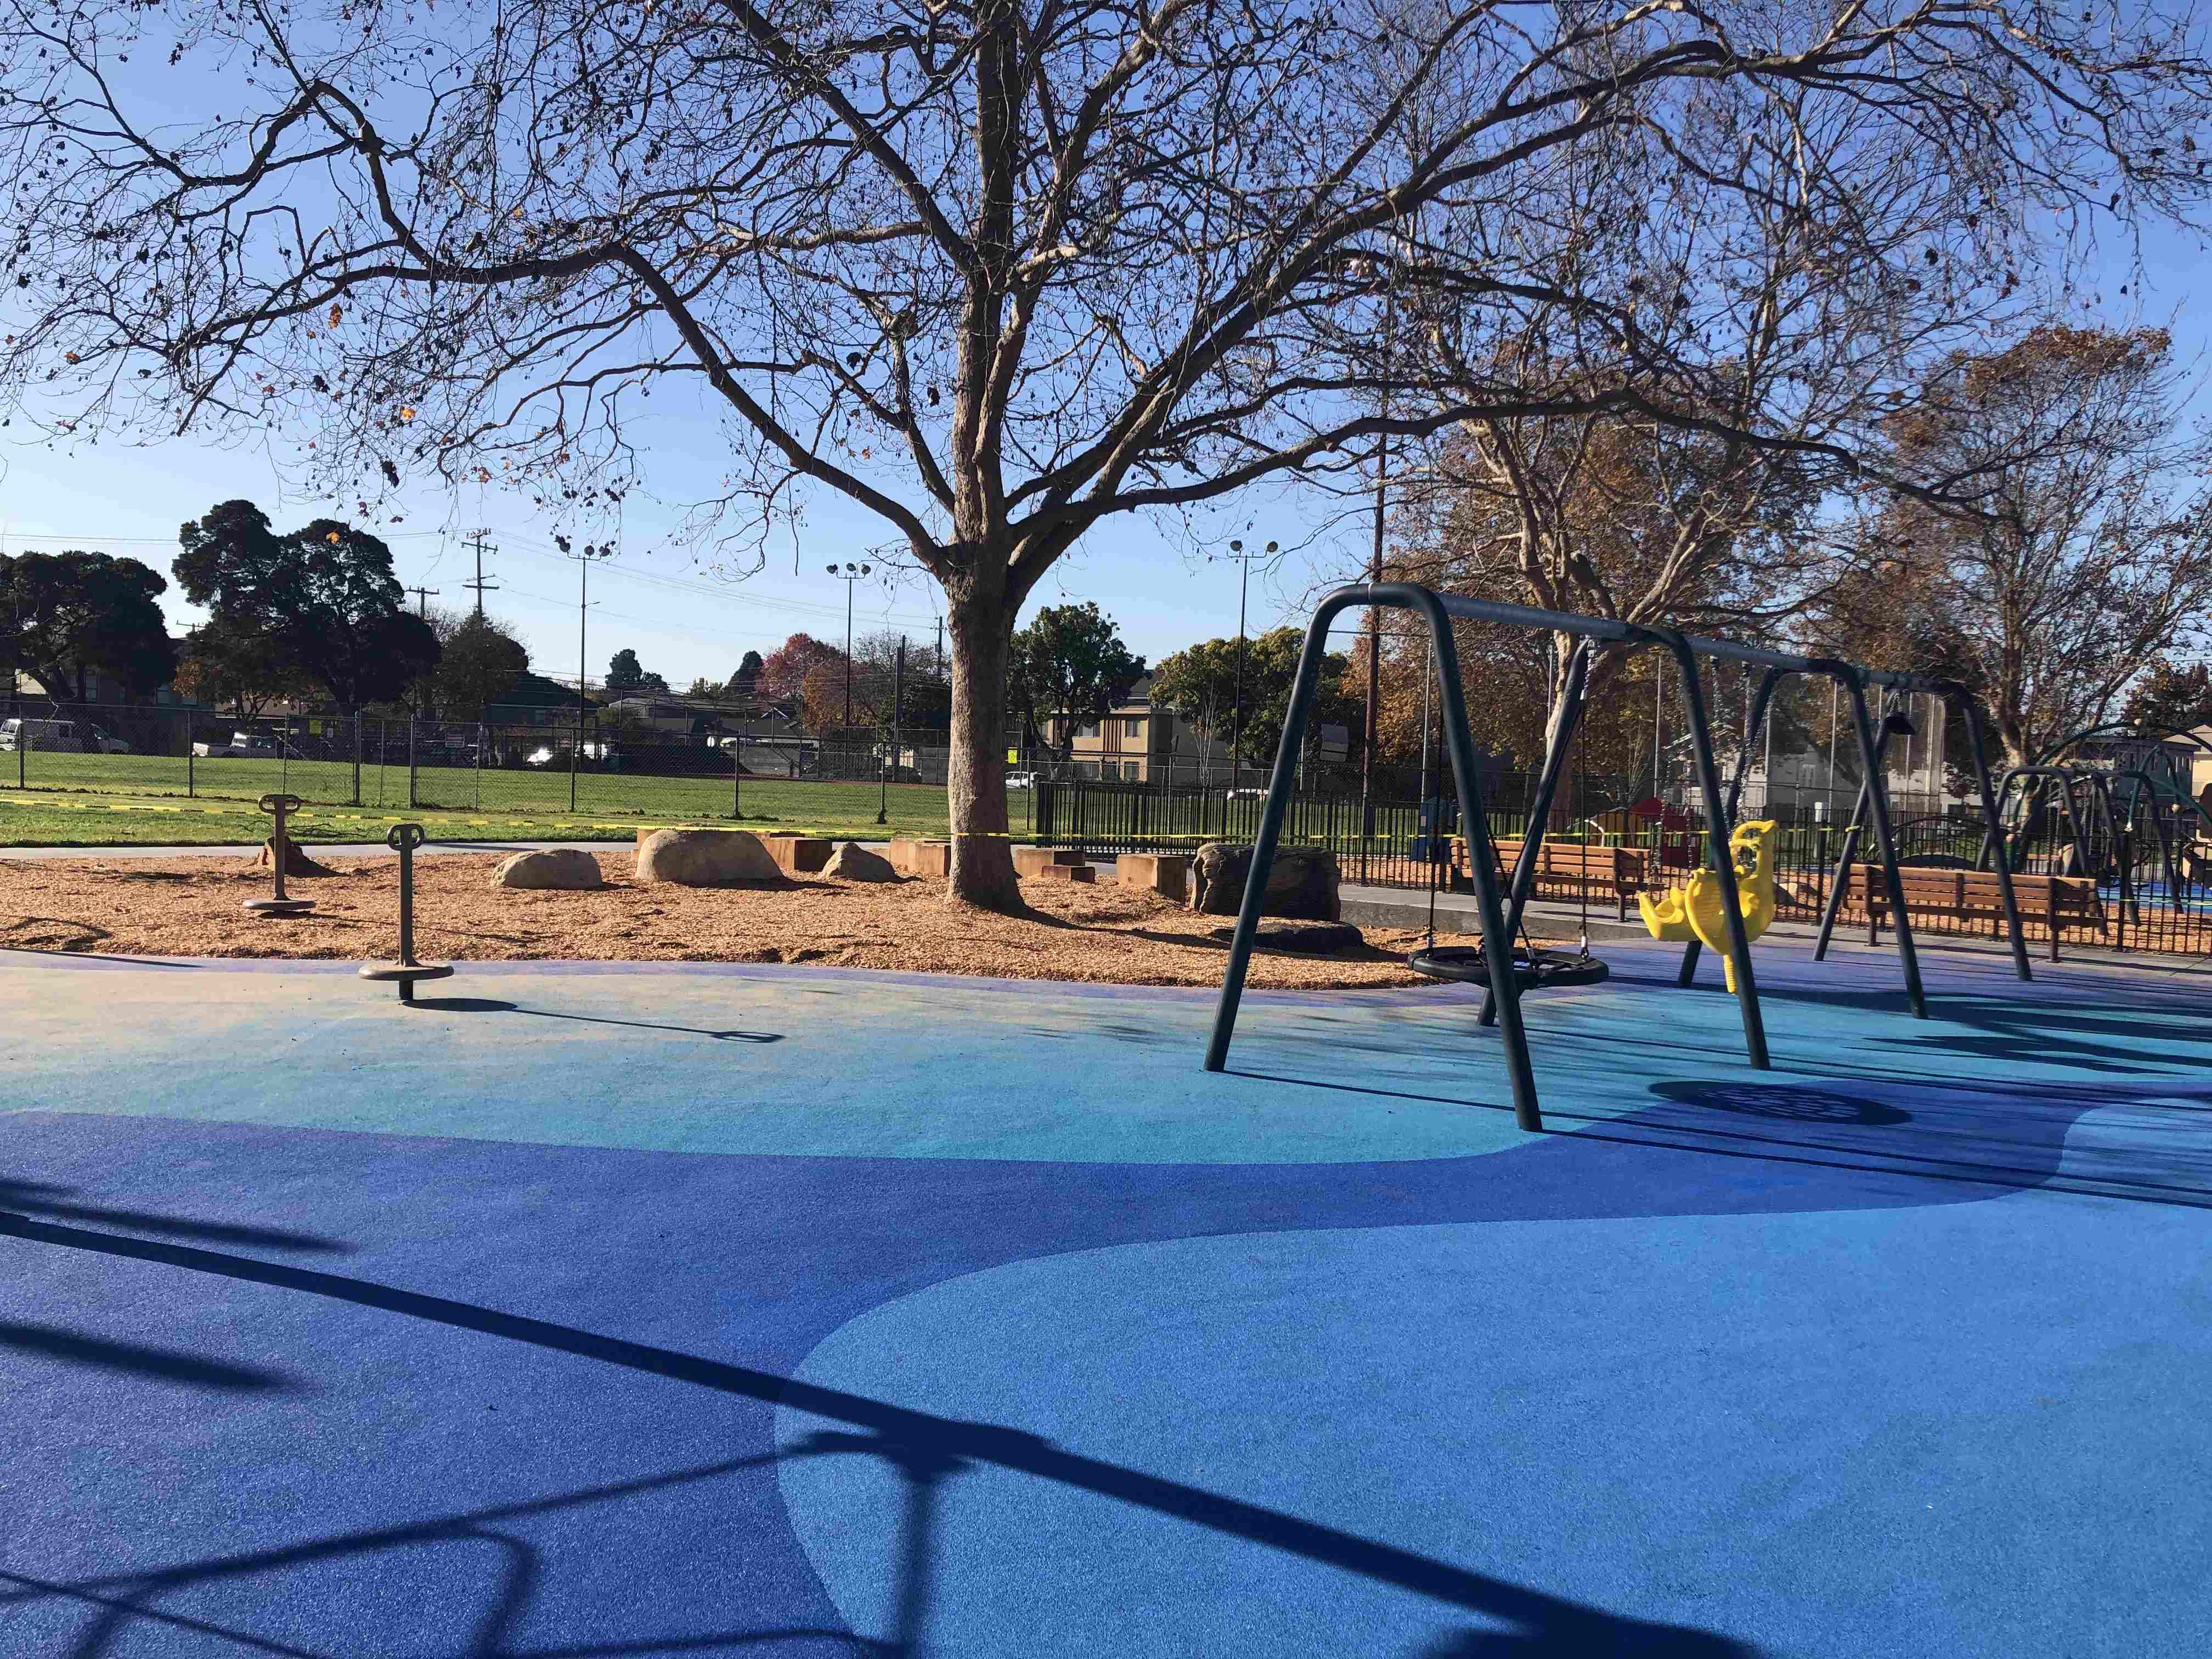 Bay-Con Infrastructure can inspect your playground for safety issues